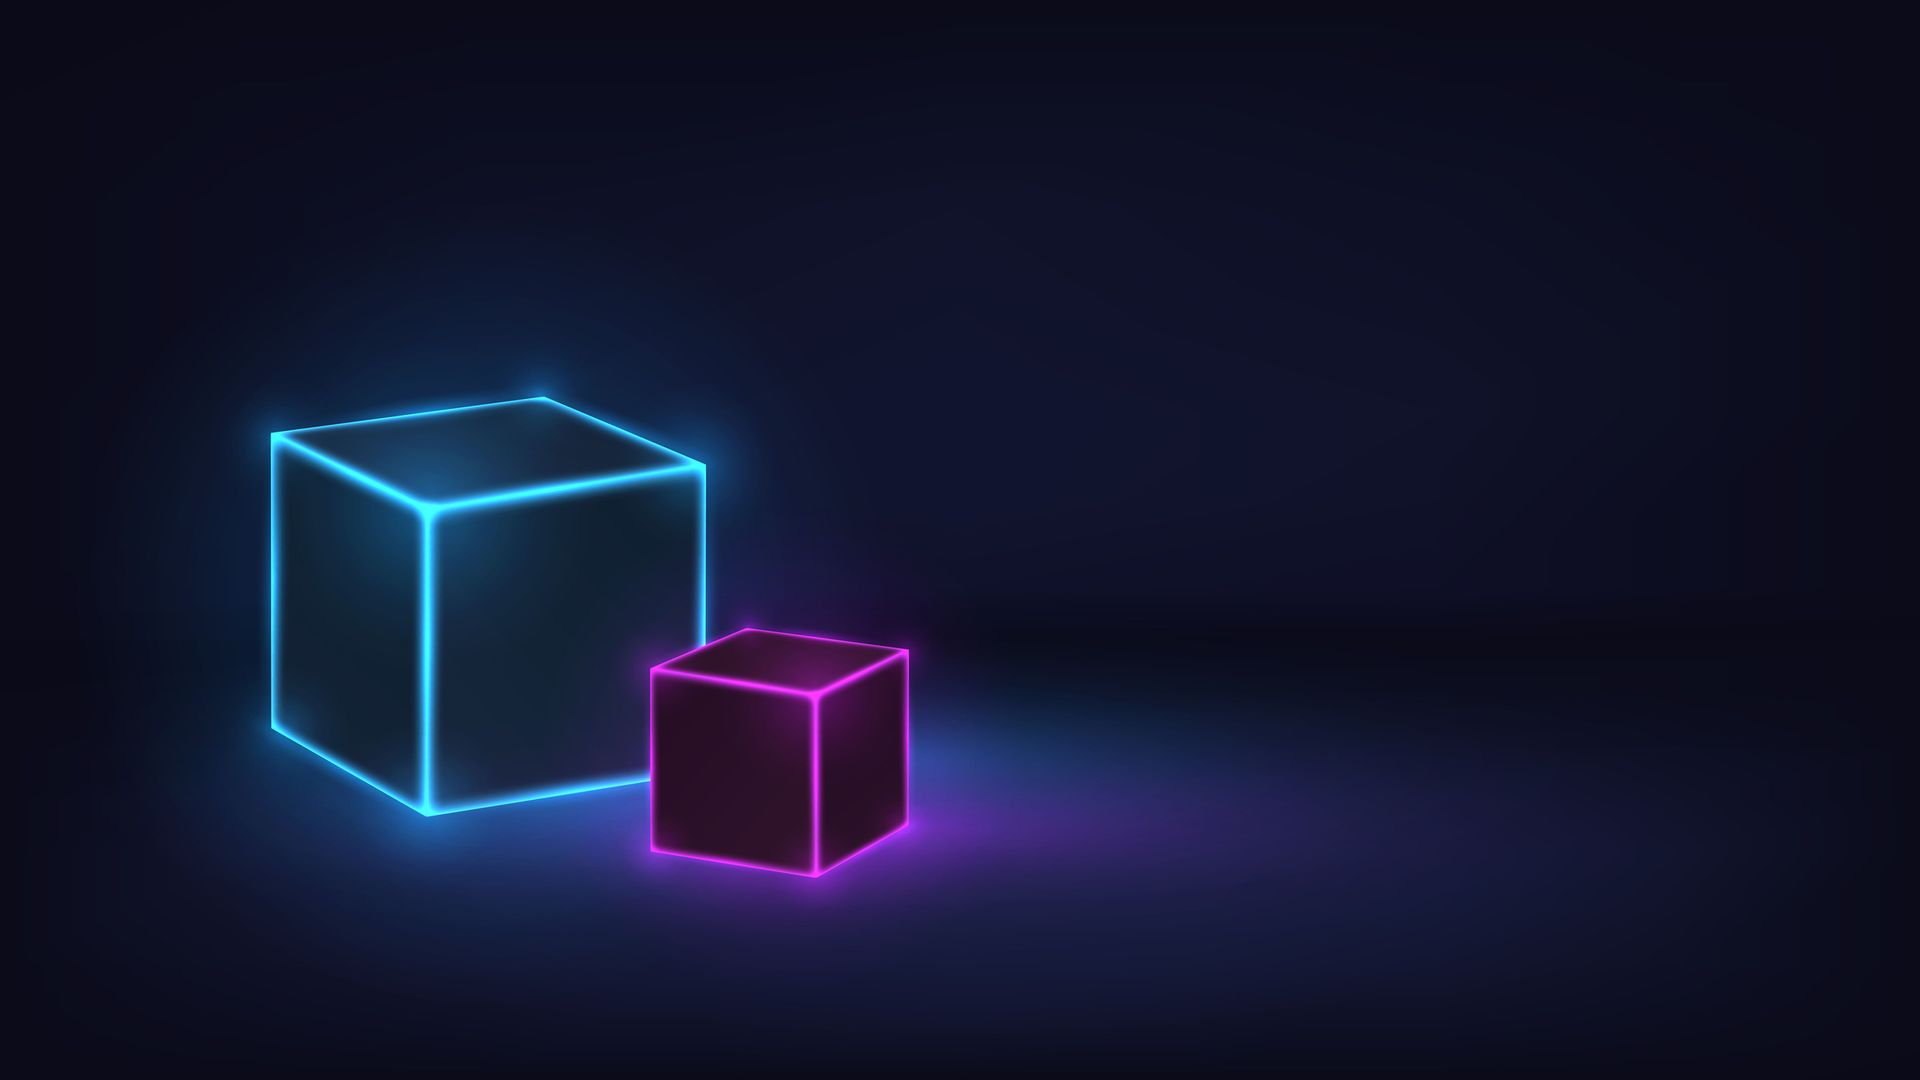 Glowing neon cubes in a dark room, concept: security, technology, databases